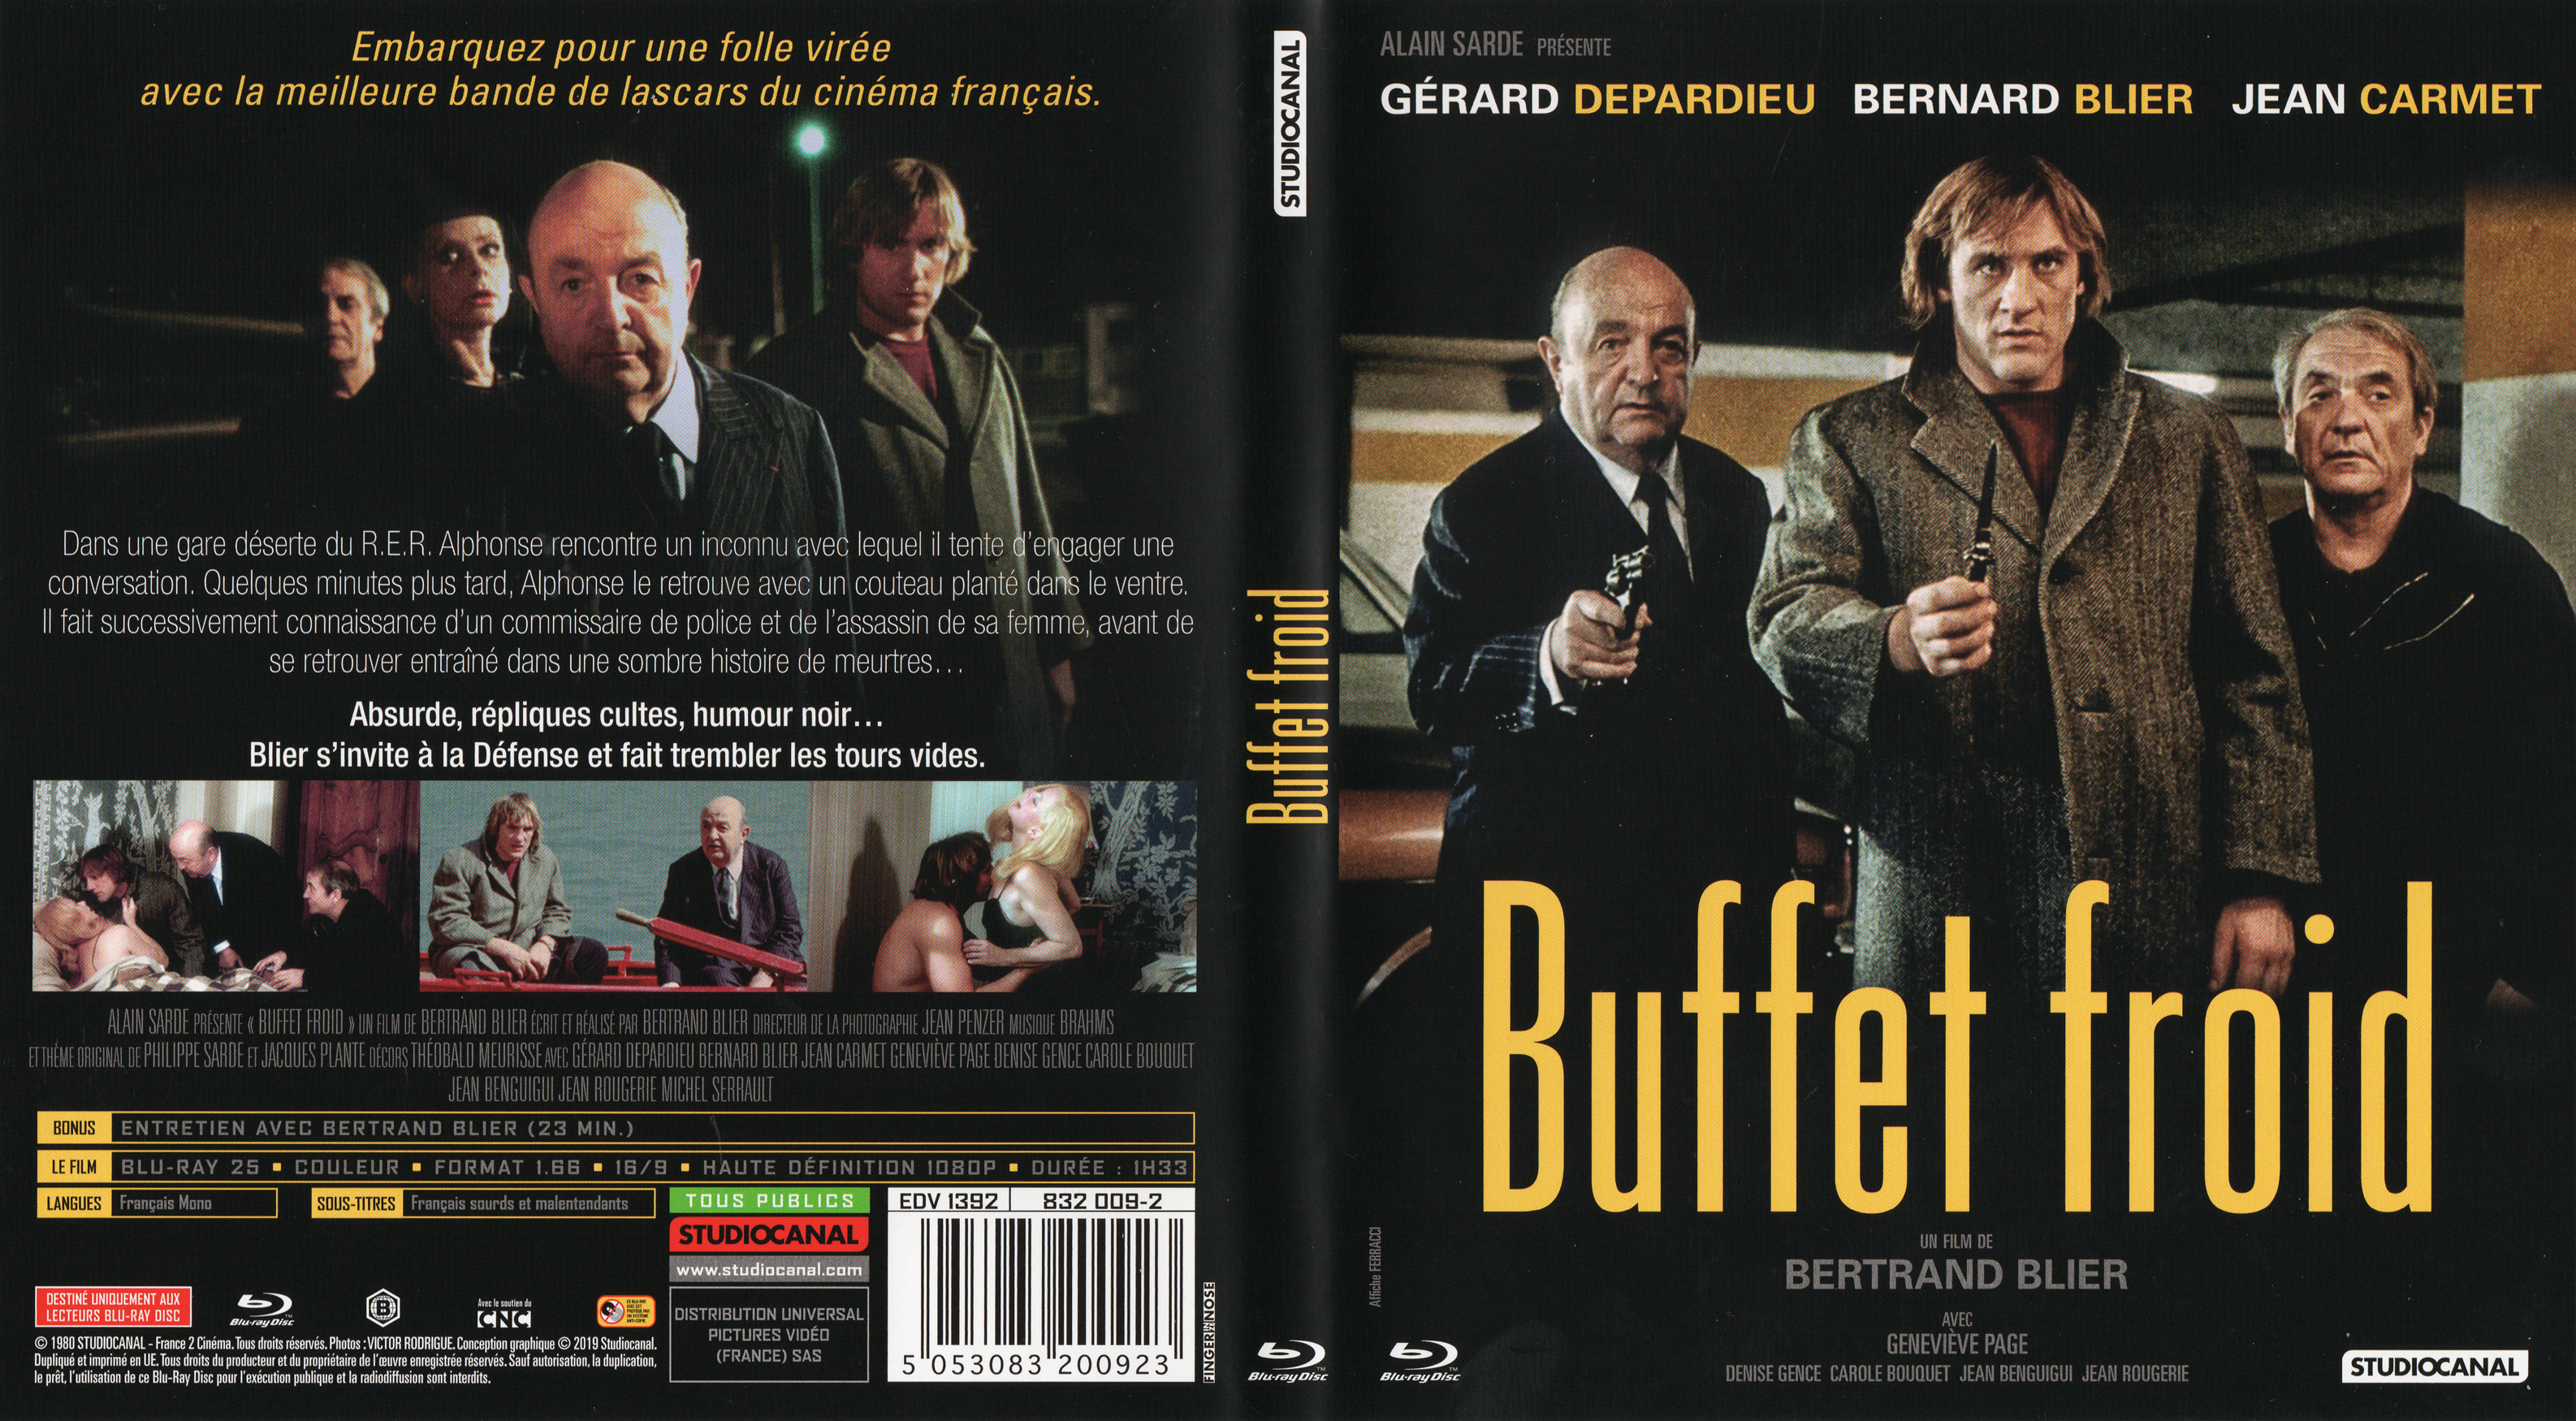 Jaquette DVD Buffet froid (BLU-RAY)